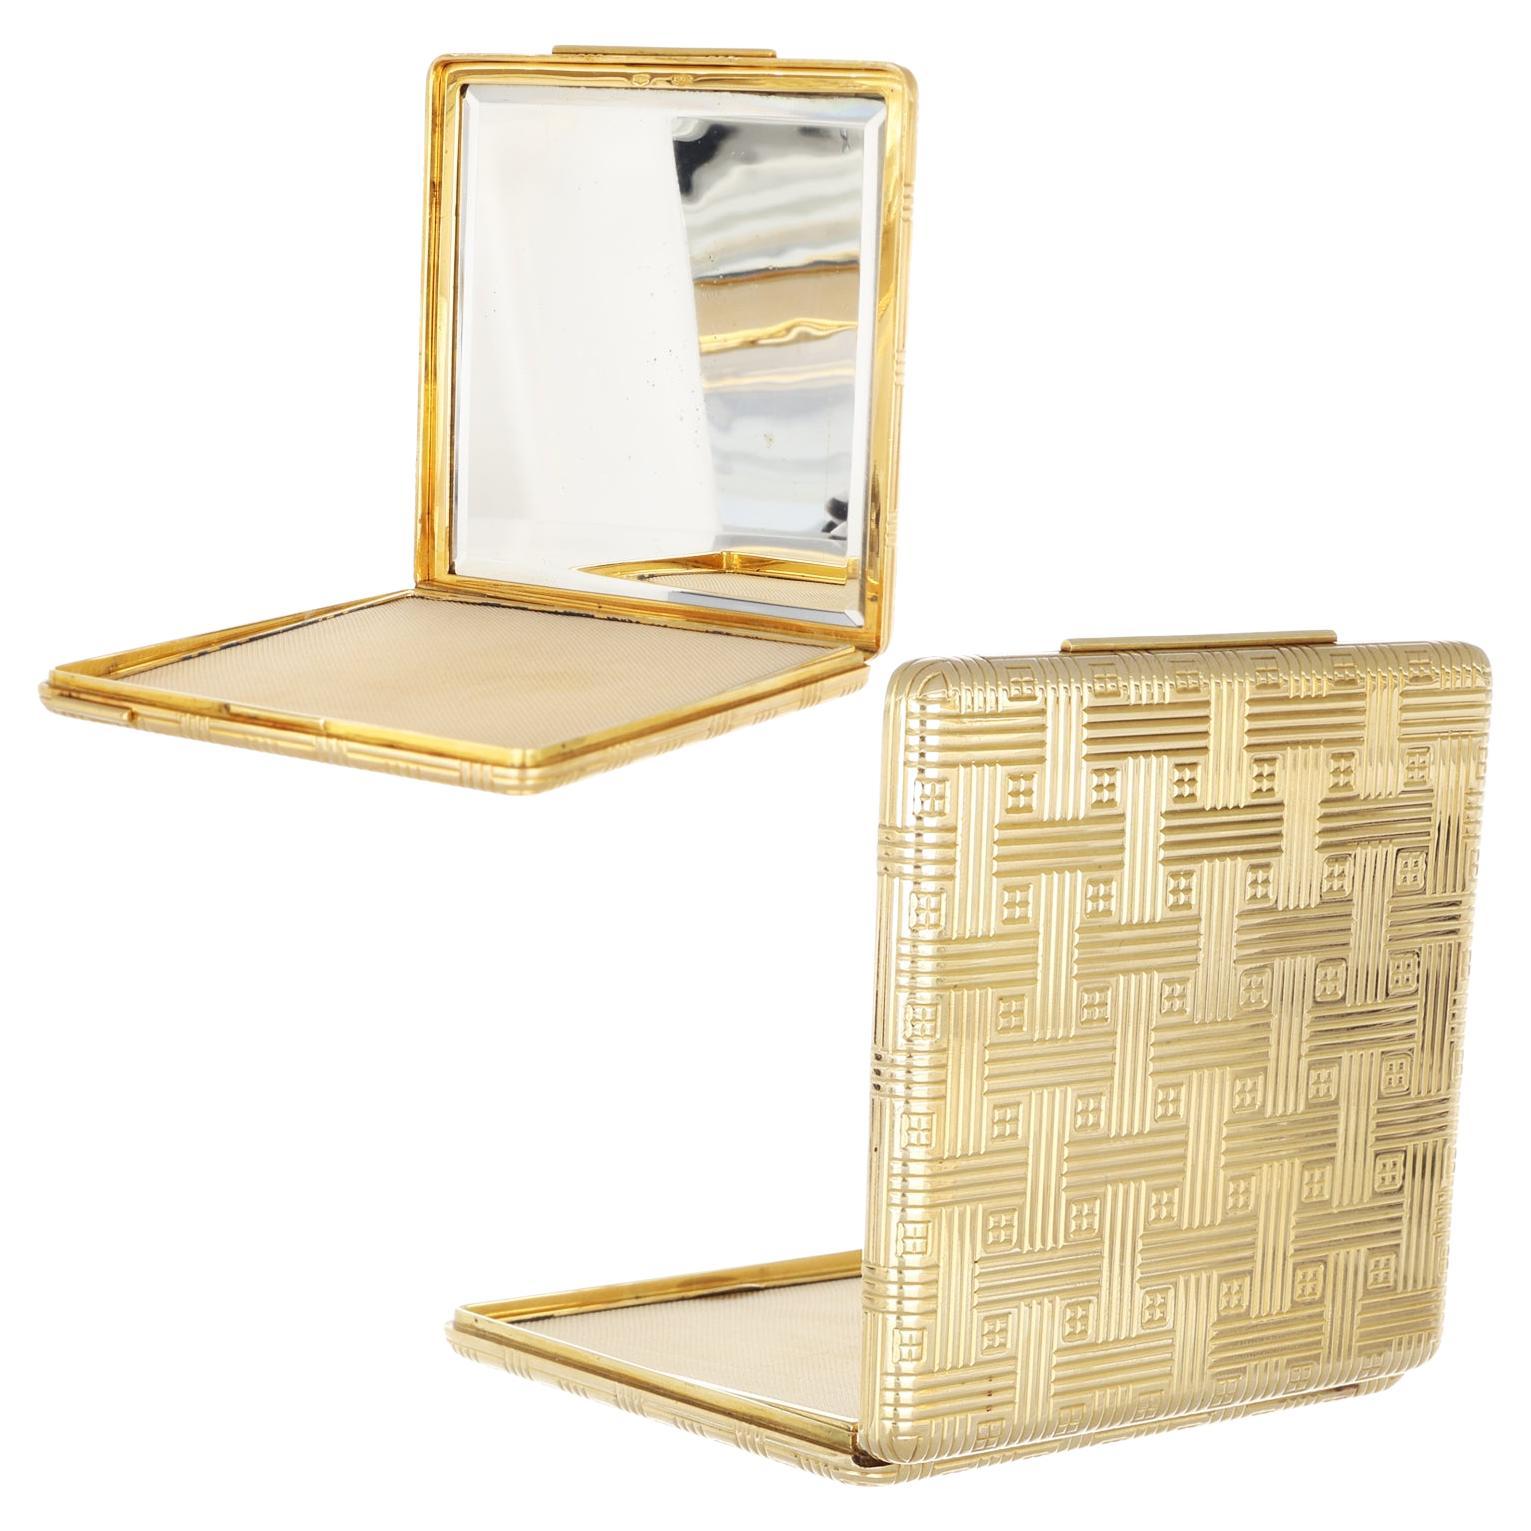 18Kt Gold Rare Compact Powder Box - Made in Italy 1970 circa - Geometric Pattern For Sale